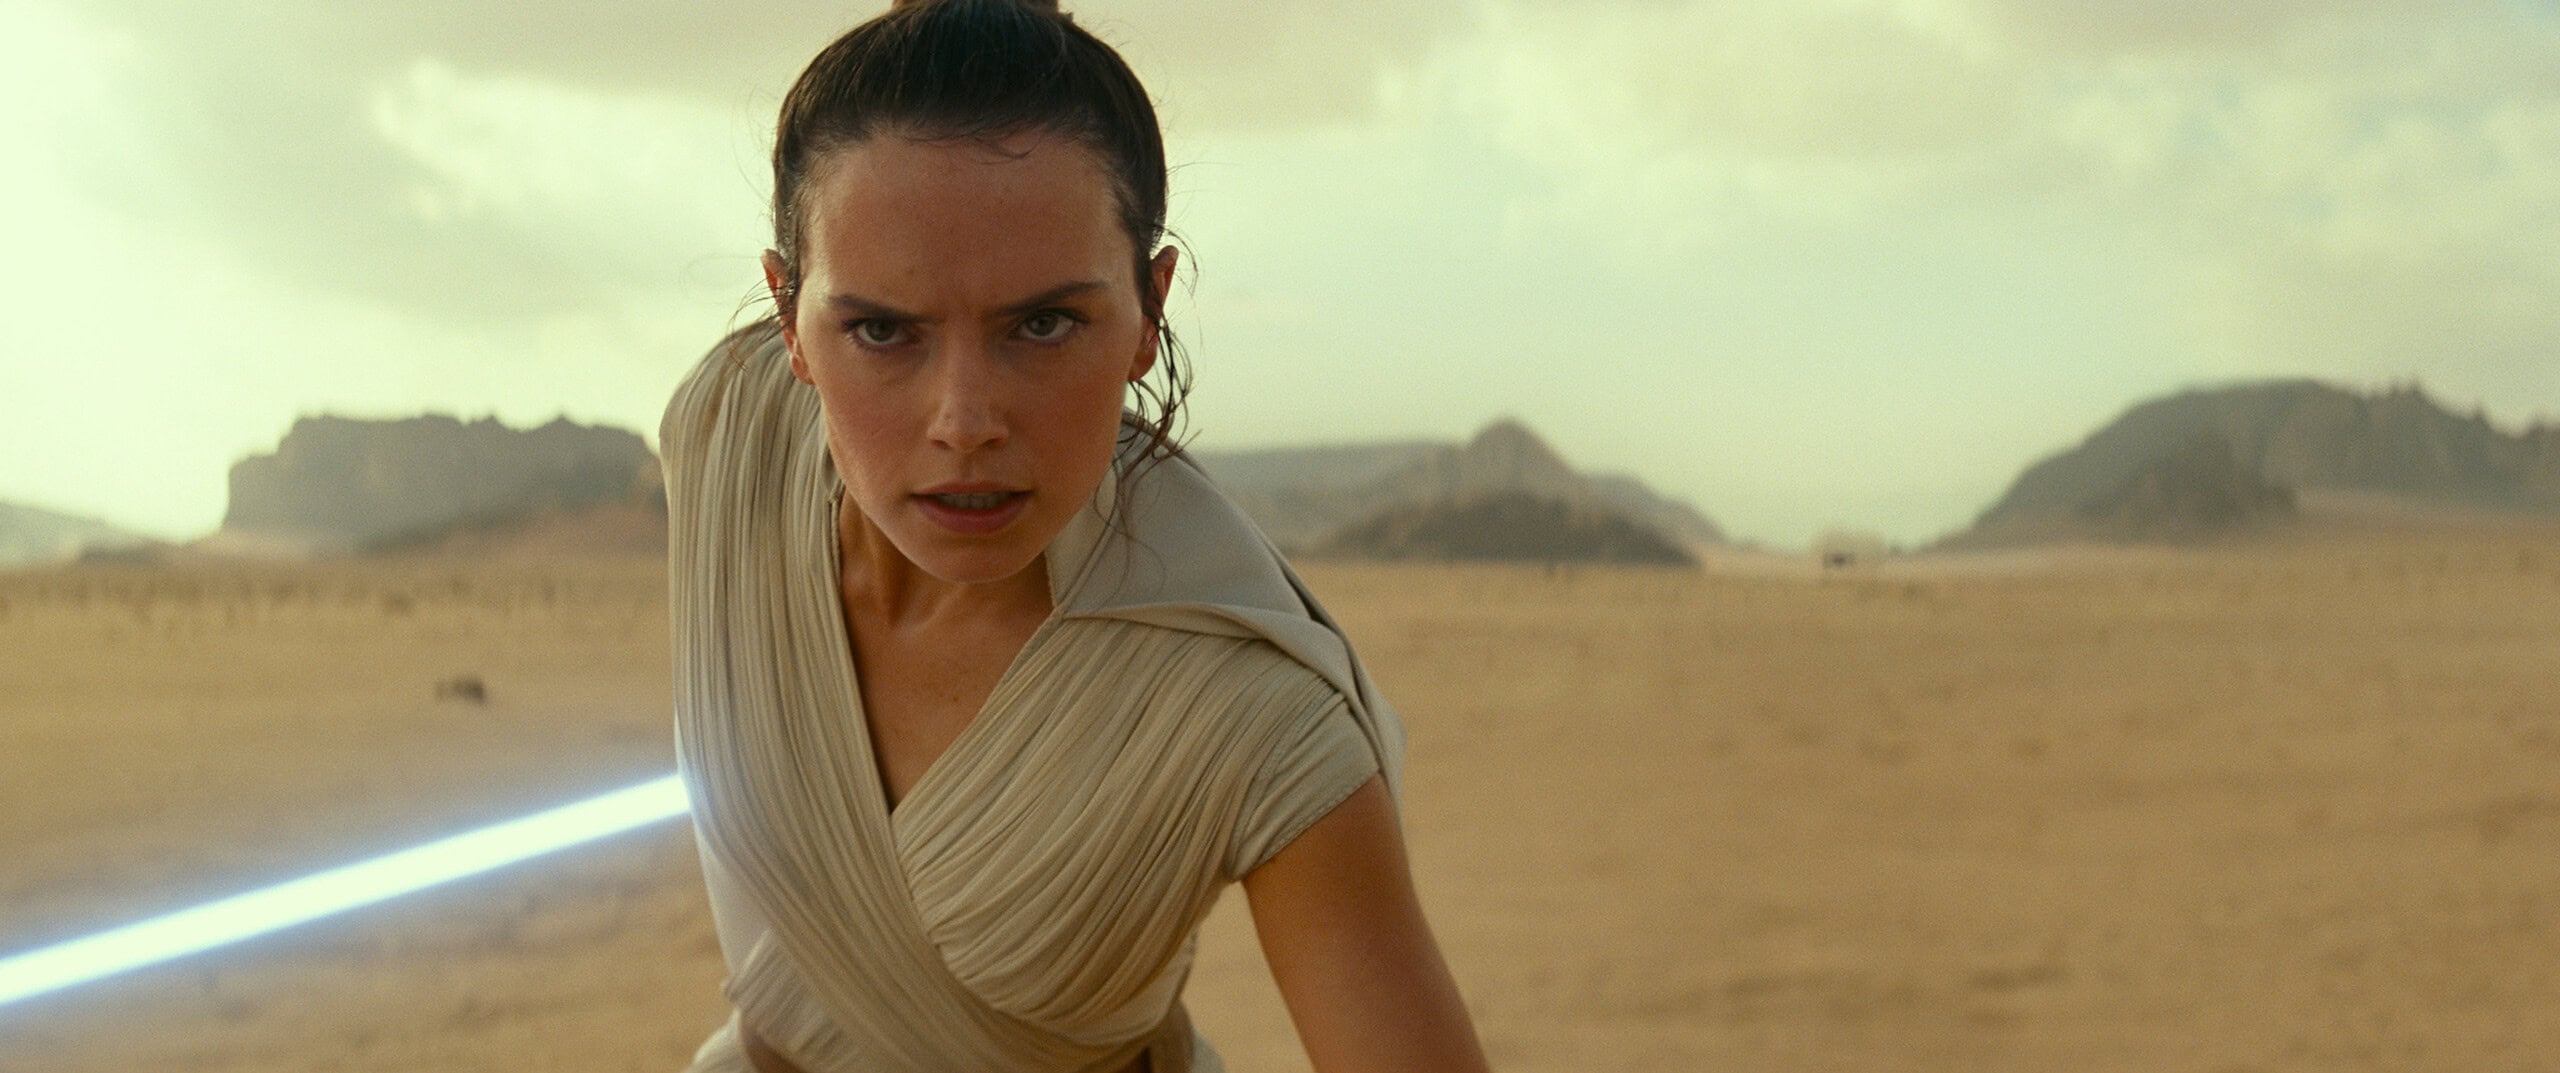 Daisy Ridley Confirms One New Star Wars Movie as Rey